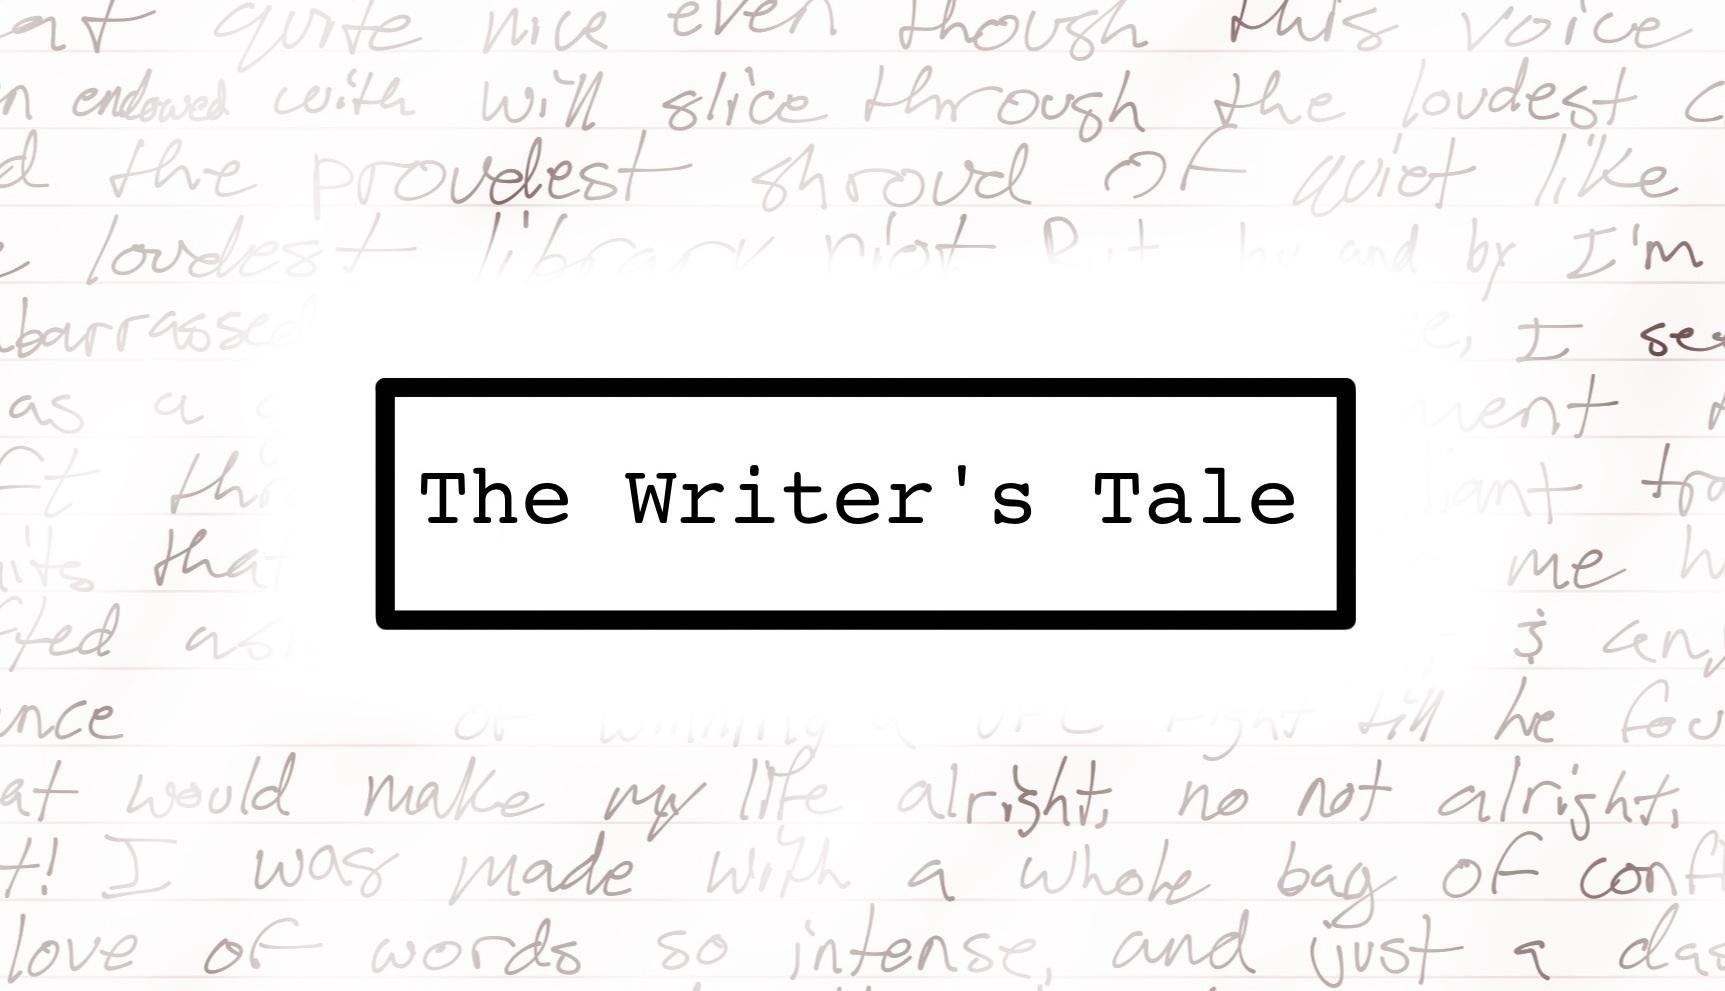 The writers tale